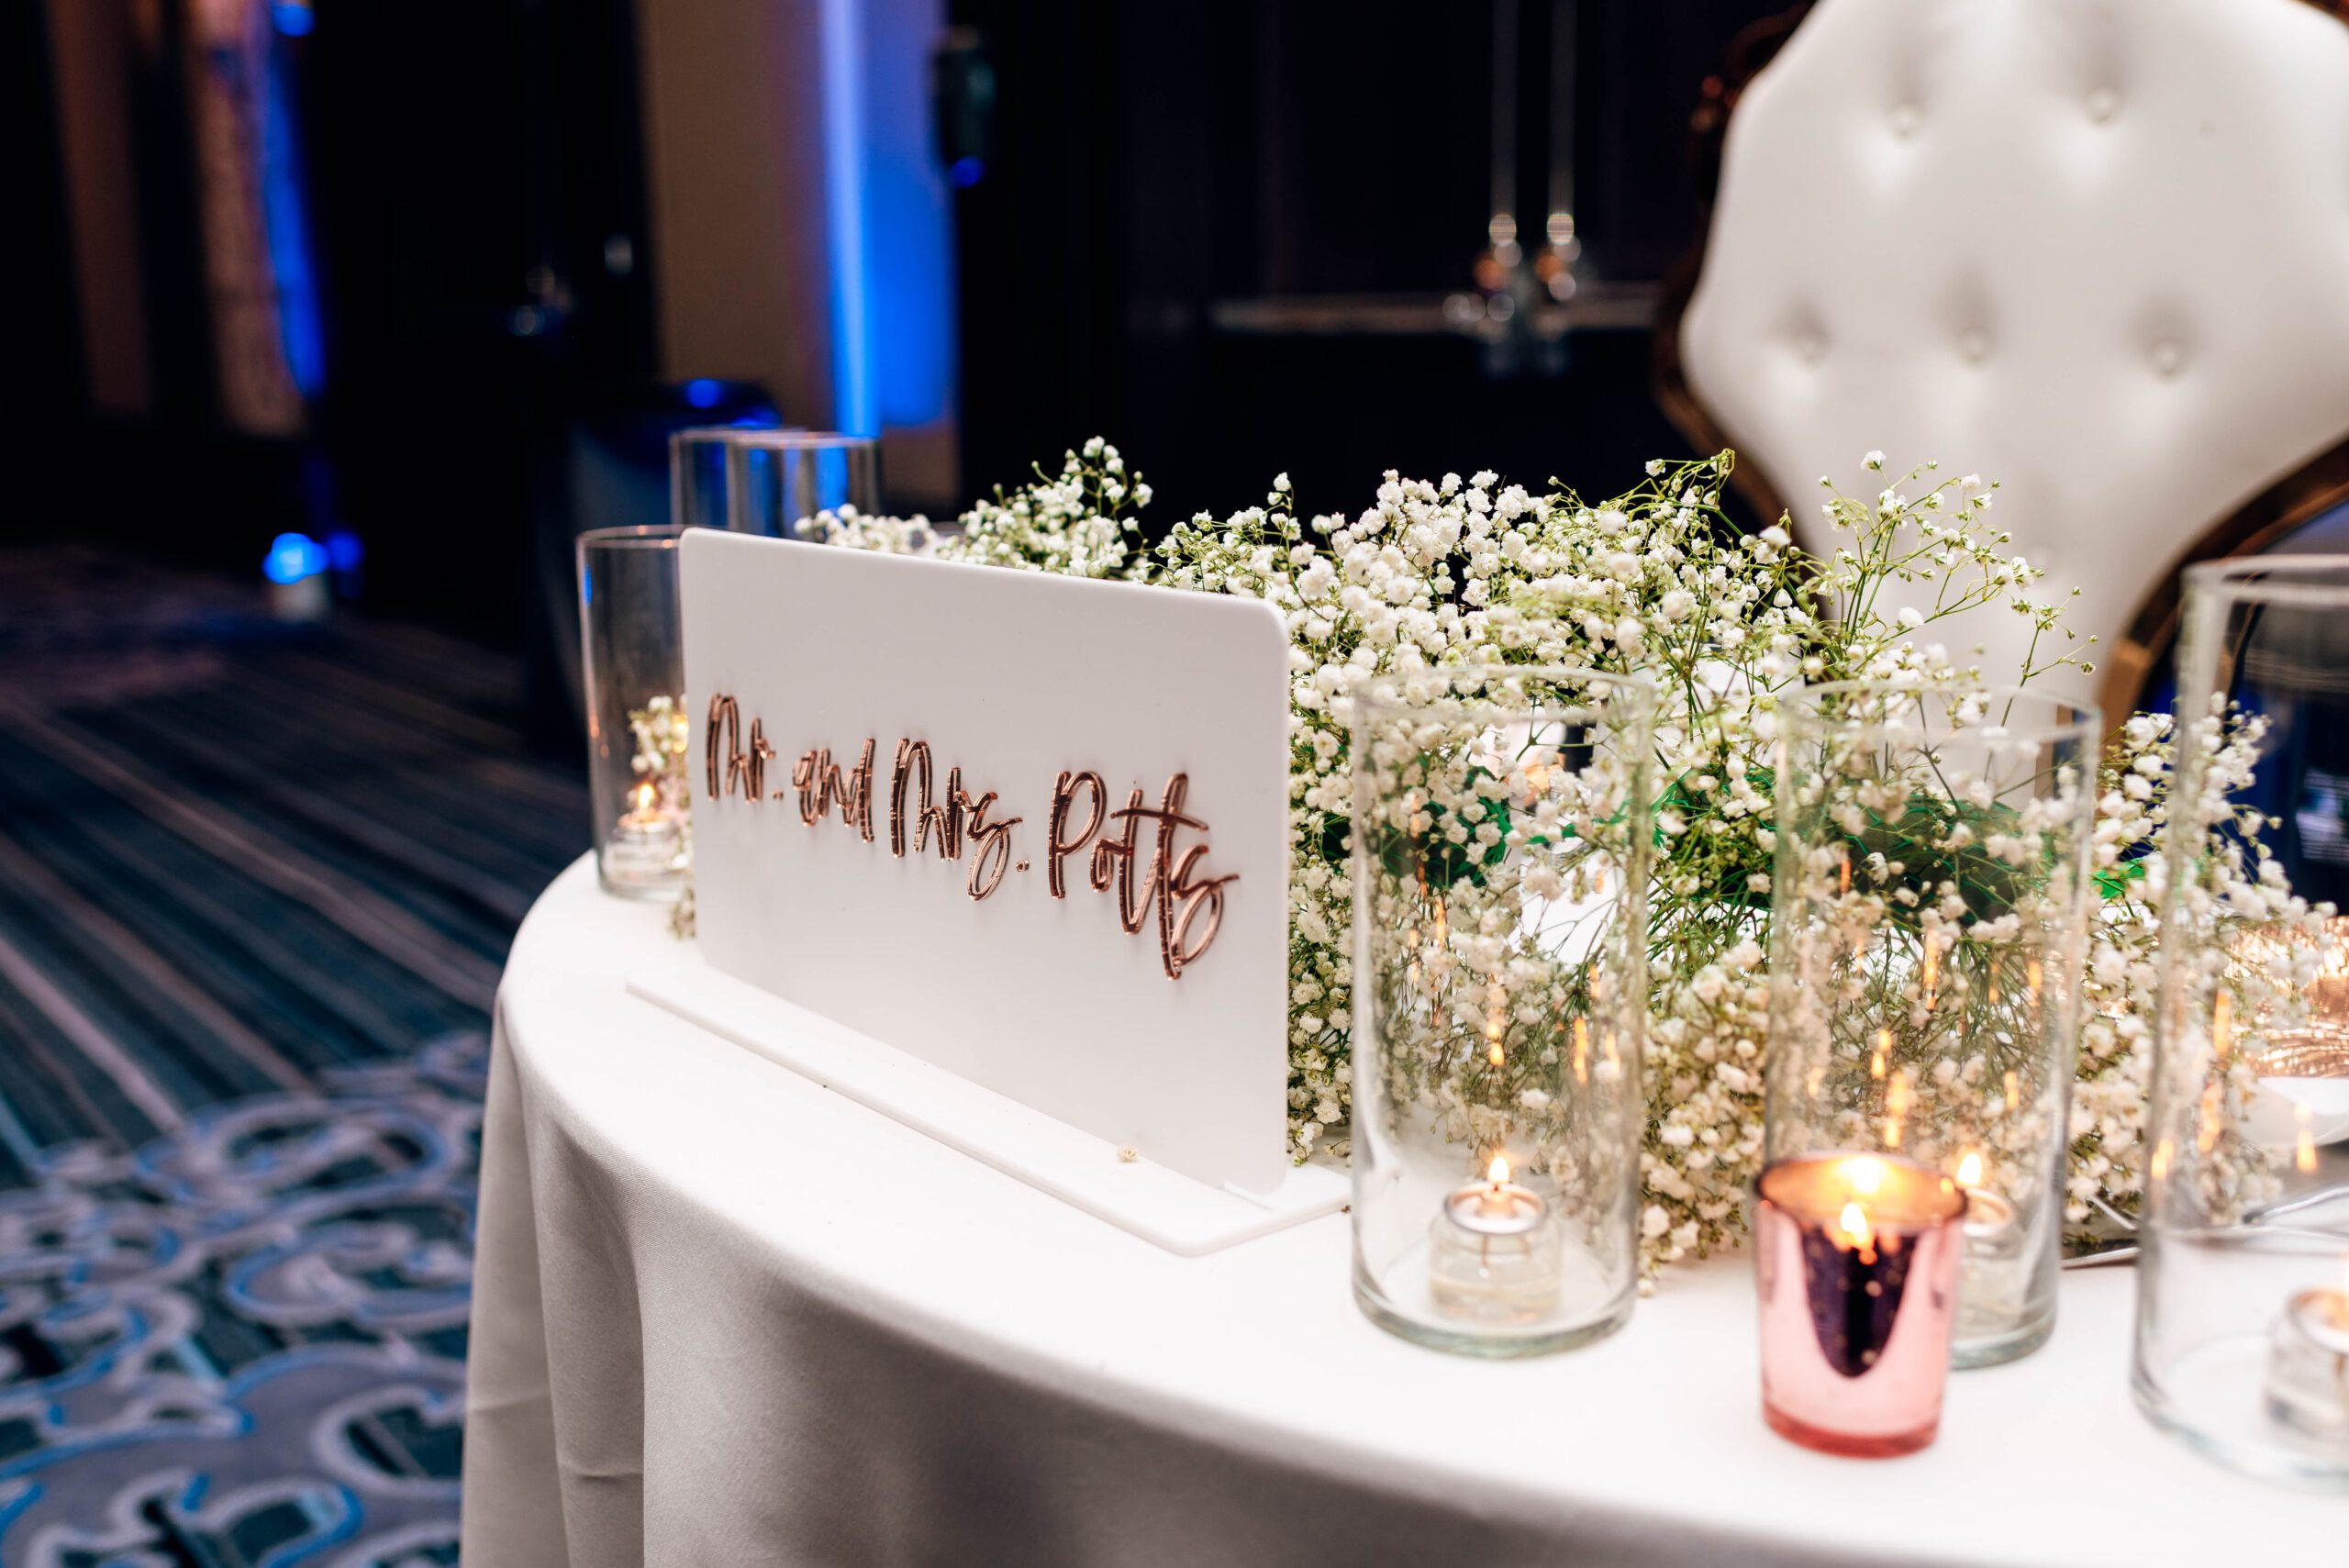 Sweetheart table at wedding reception